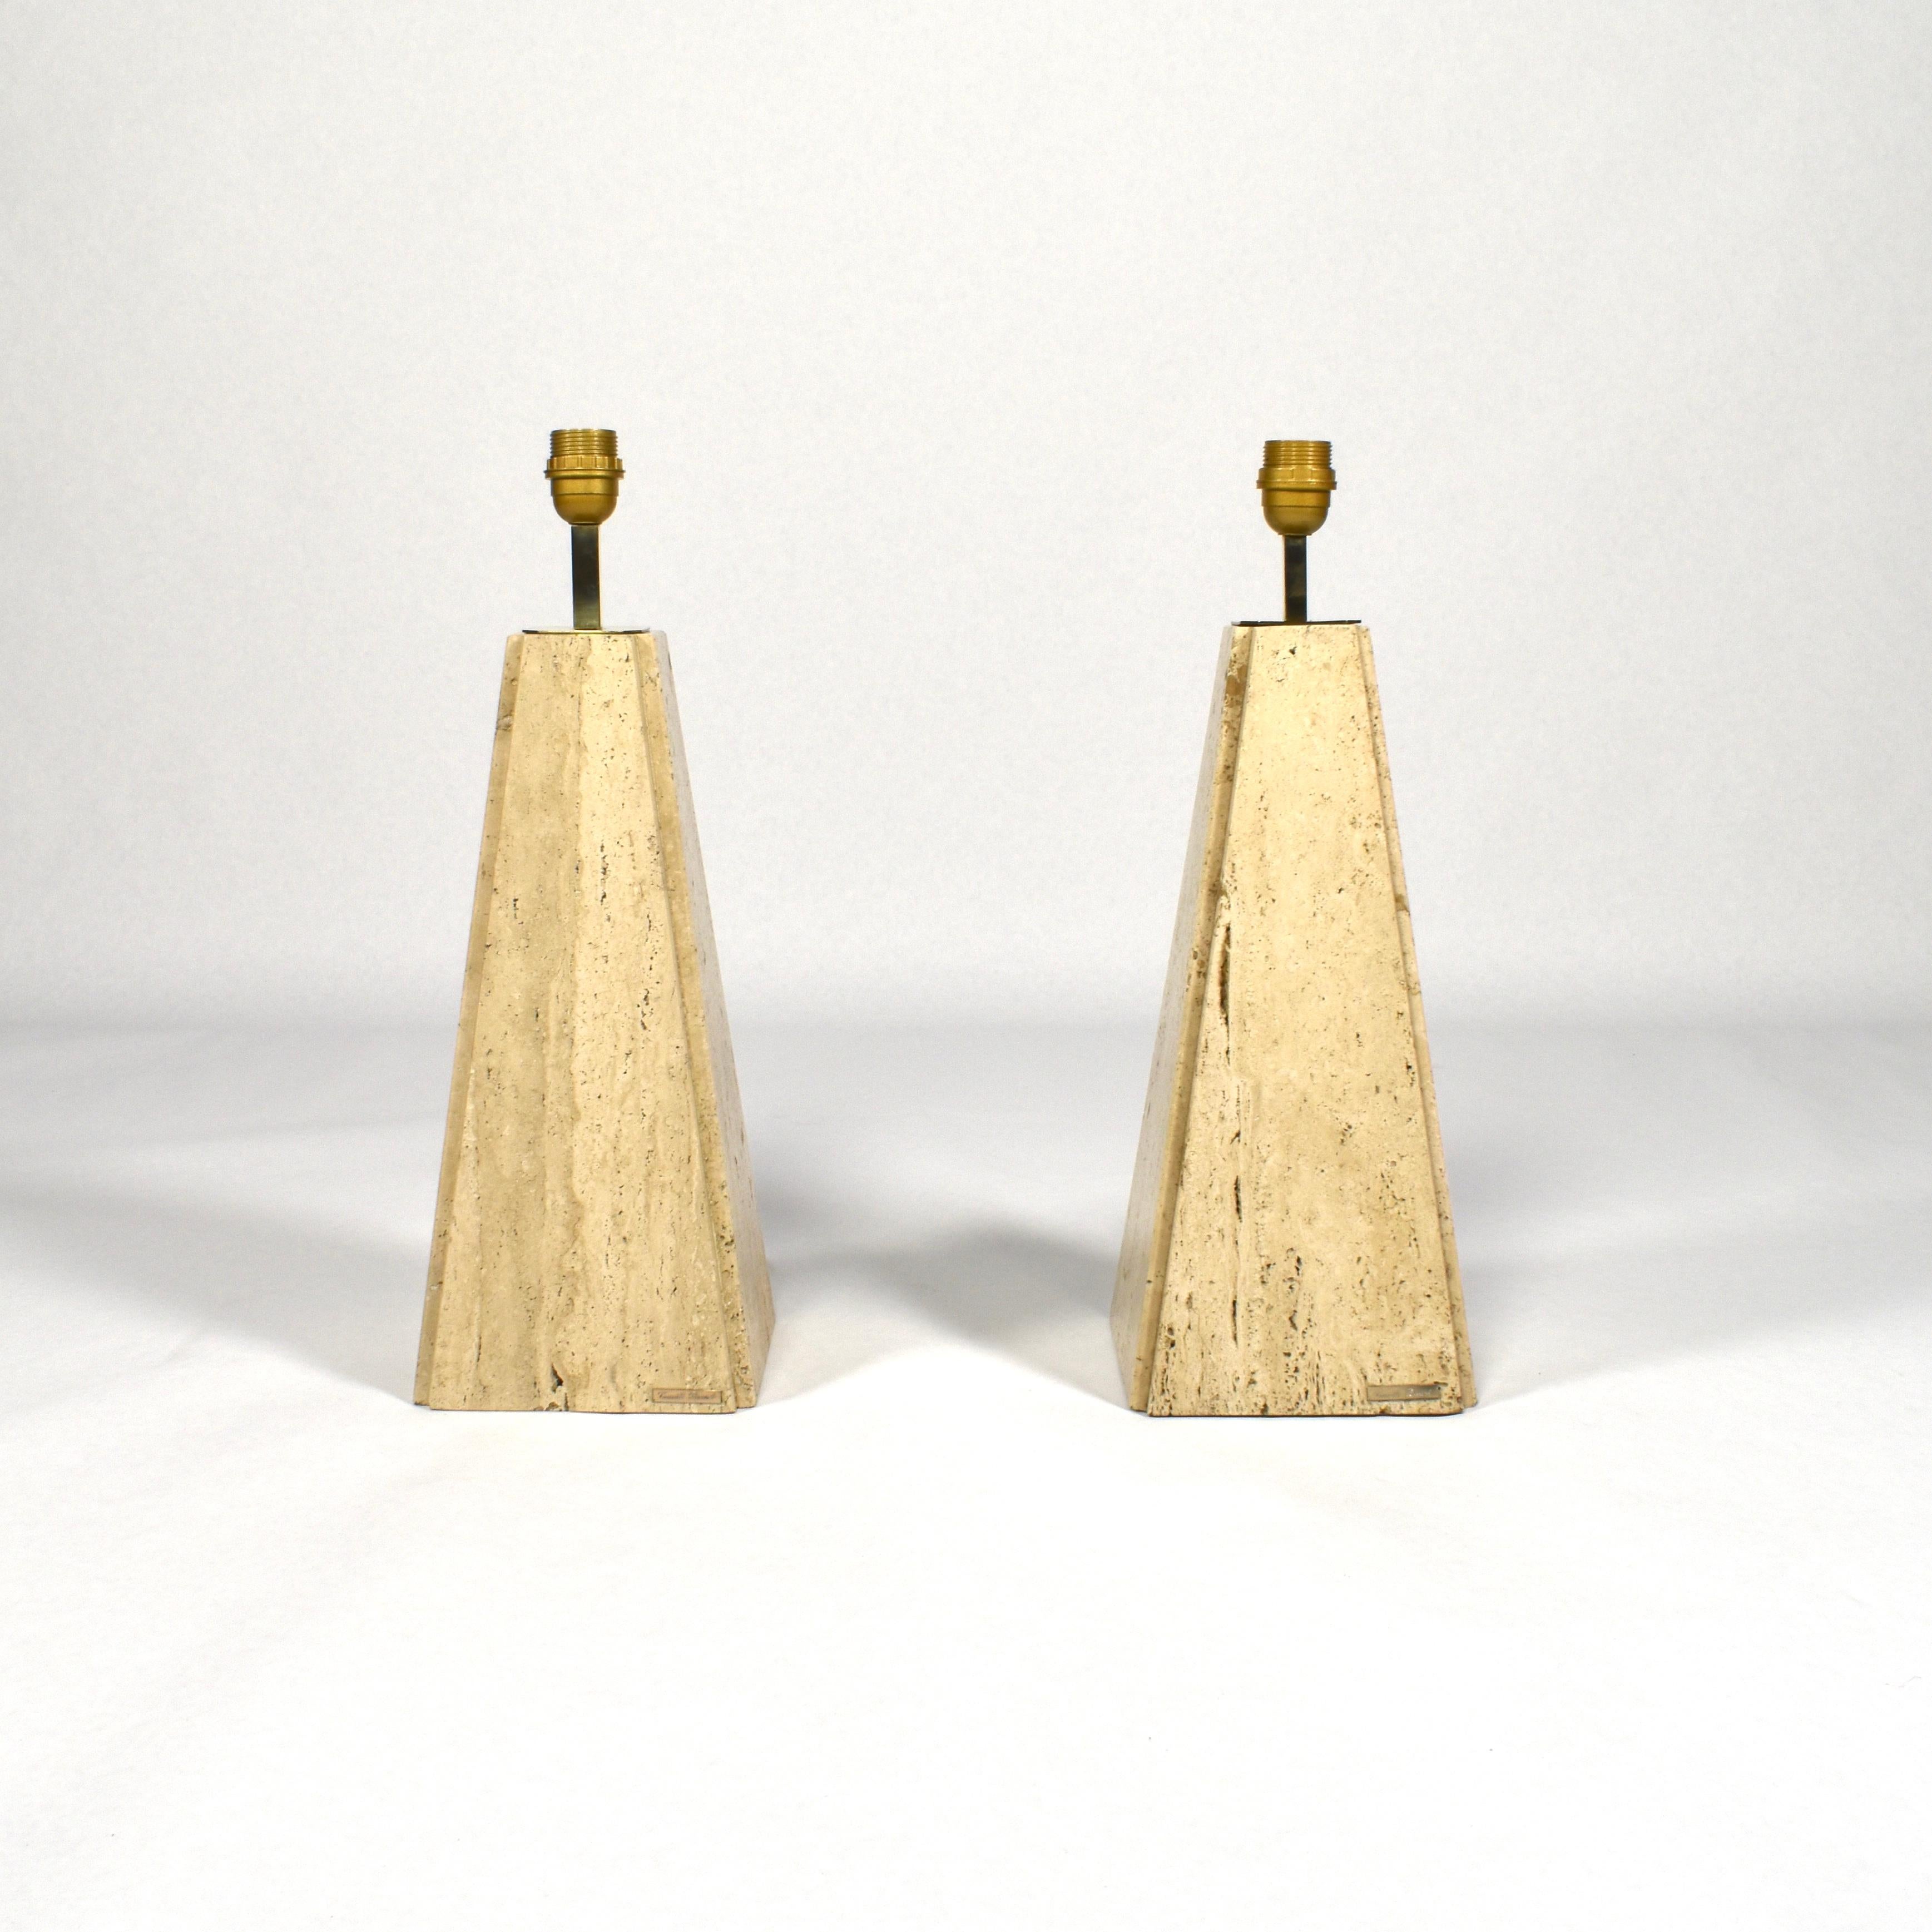 Elegant pair of Camille Breesch table lamps in travertine and brass. The lamps still remain in excellent condition and are signed with label.

Designer: Camille Breesch

Country: Belgium

Model: Table lamps

Material: Travertine / Brass

Period: